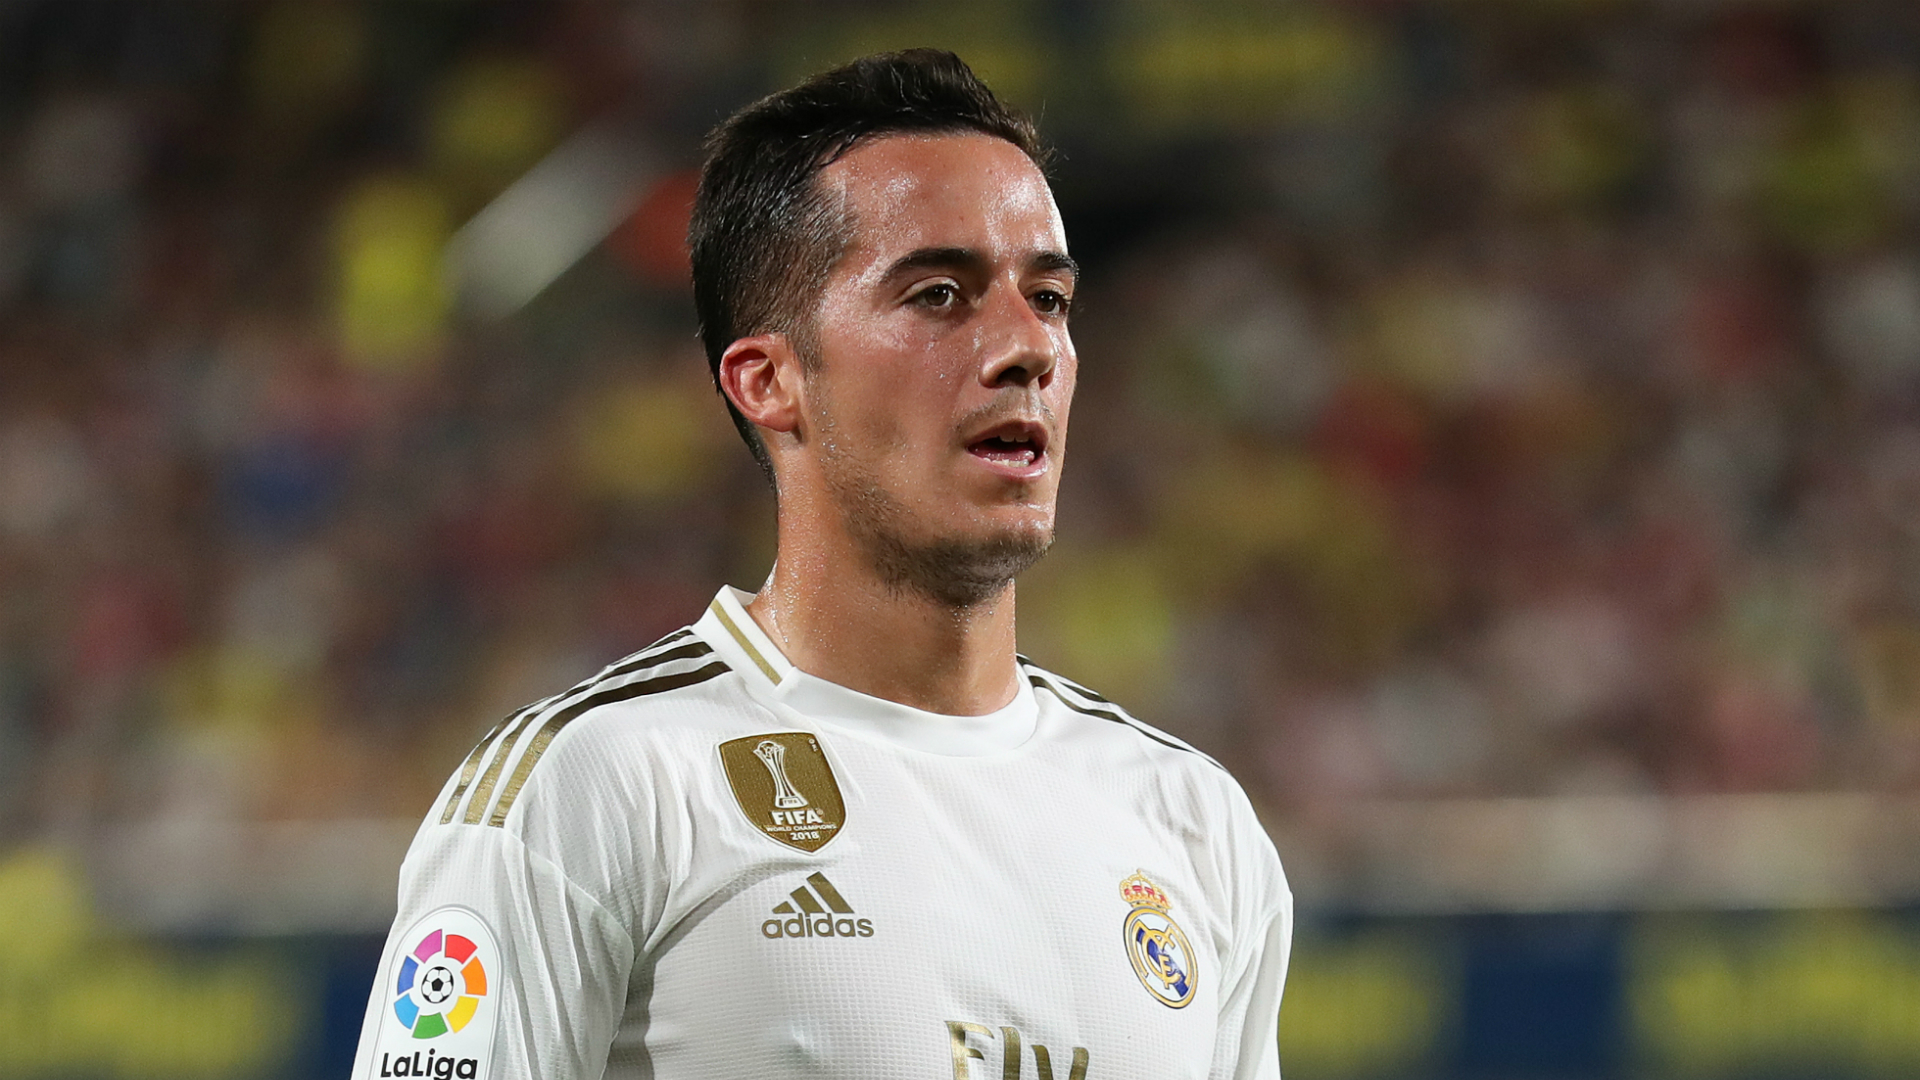 Real Madrid: 5 players to watch closely after Eden Hazard’s latest injury - Bóng Đá